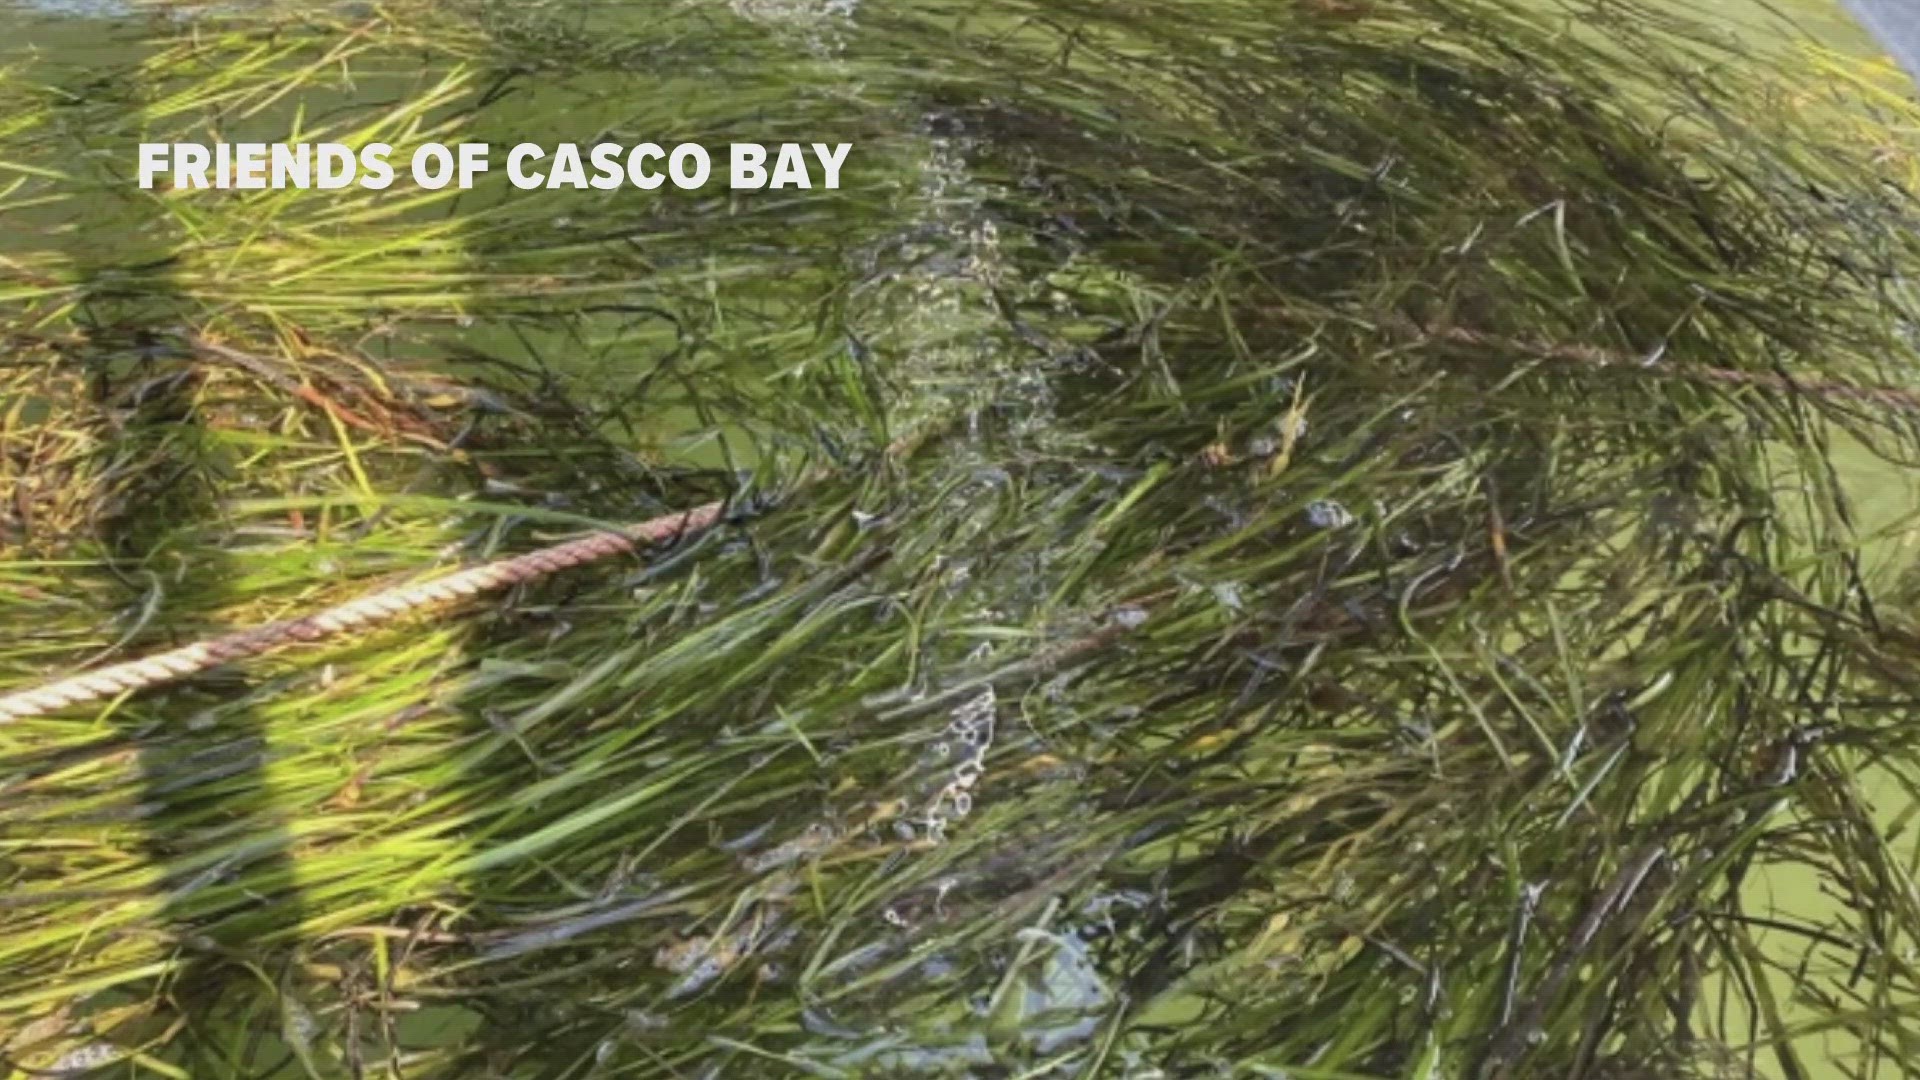 A new exhibit at a Boston-based aquarium showcases eelgrass and its ability to pull carbon emissions from the air, but warming waters threaten the plant.